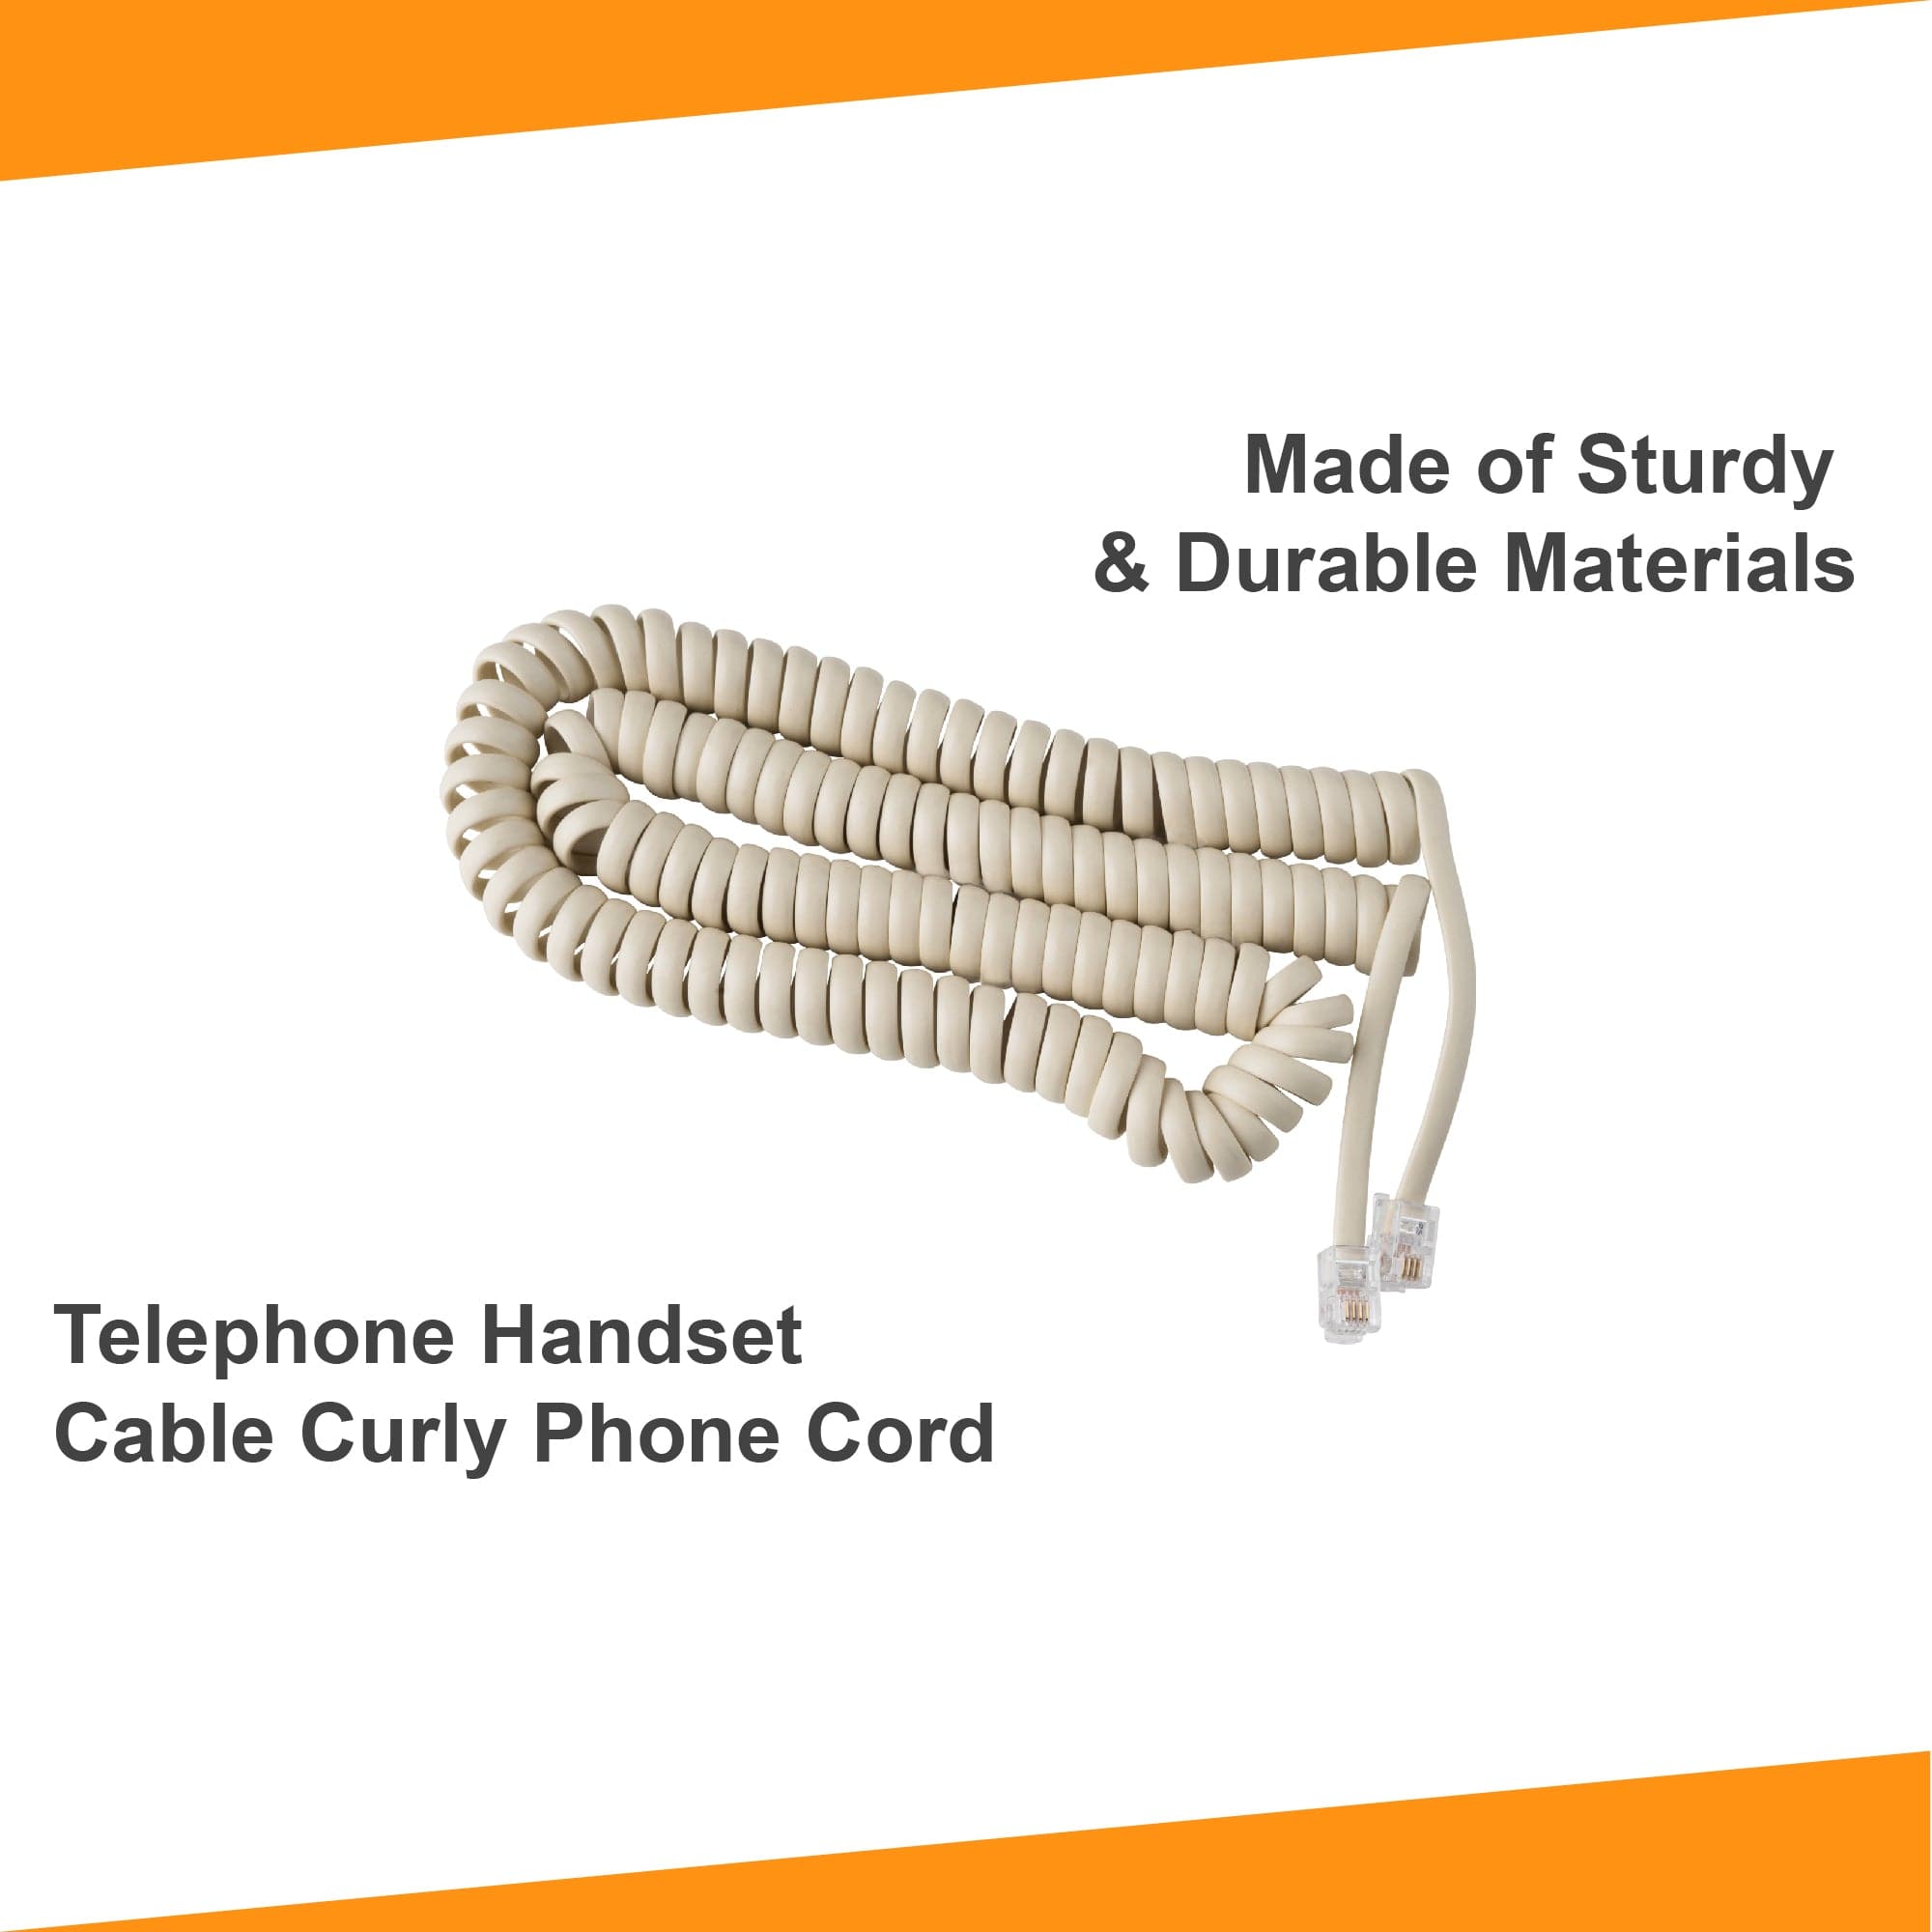 Phone Cord for Landline Phone – Tangle-Free, Curly Telephones Land Line Cord –